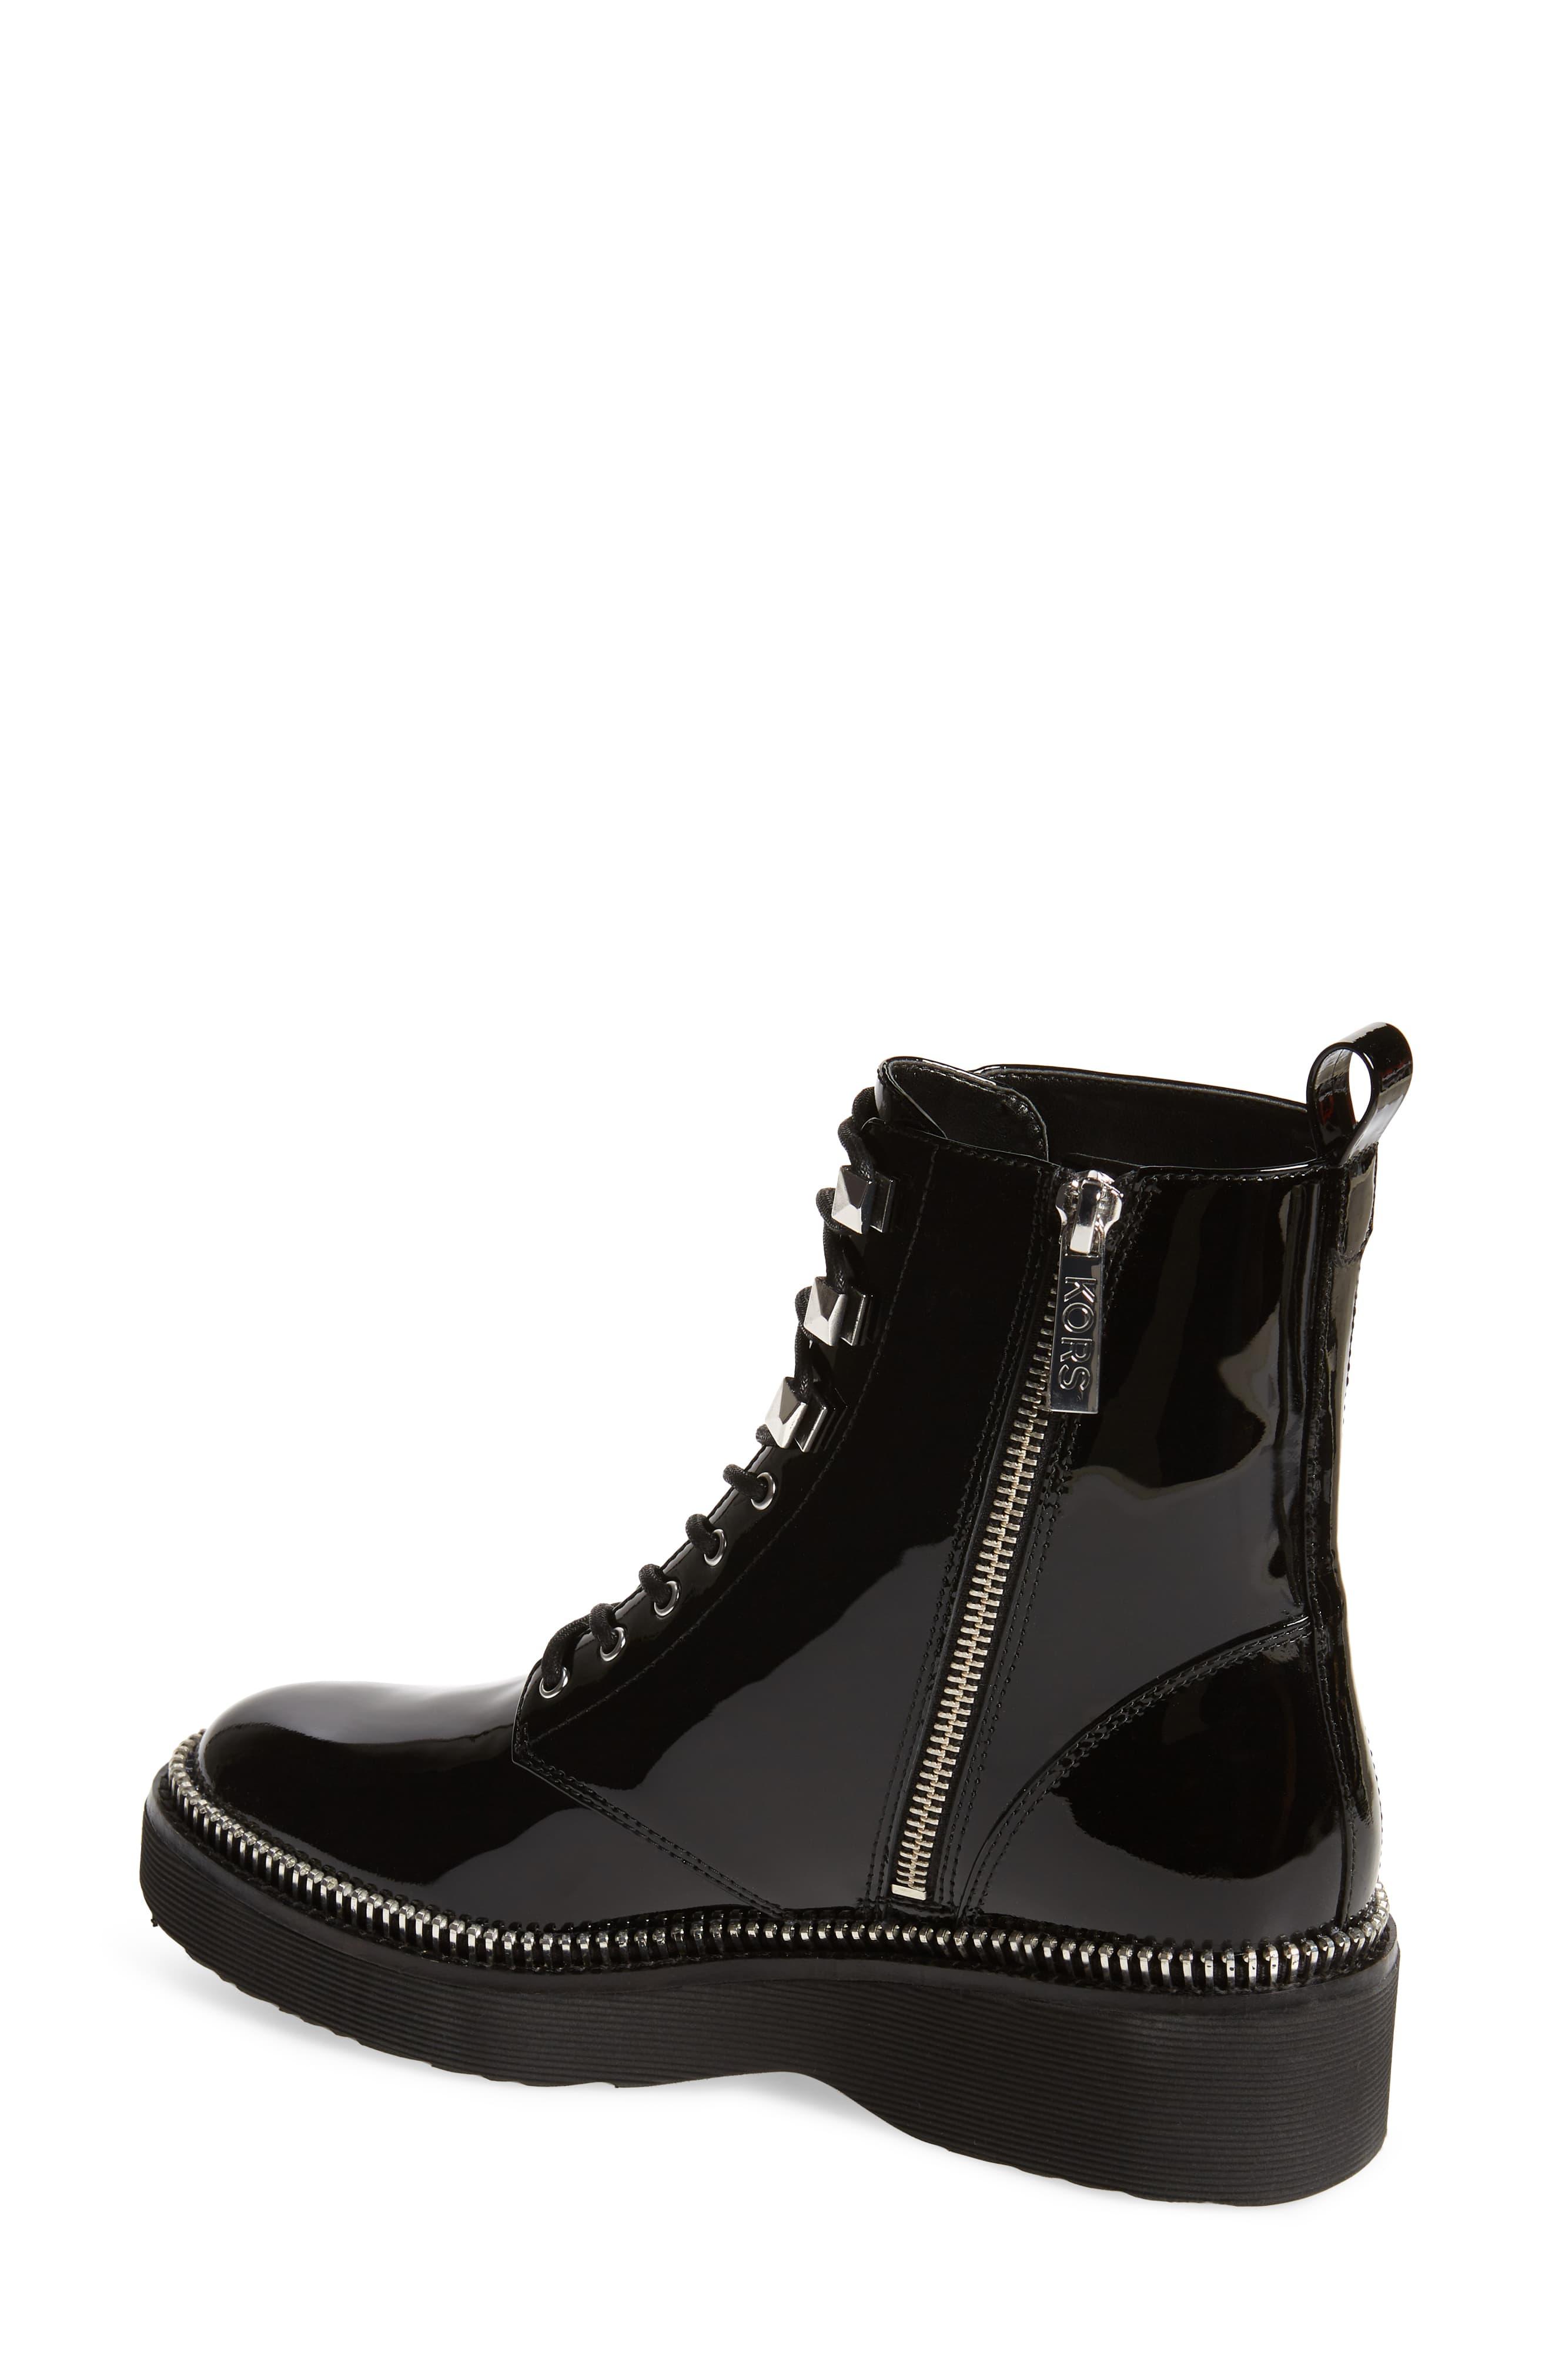 MICHAEL Michael Kors Haskell Combat Boot in Black Patent Leather (Black ...